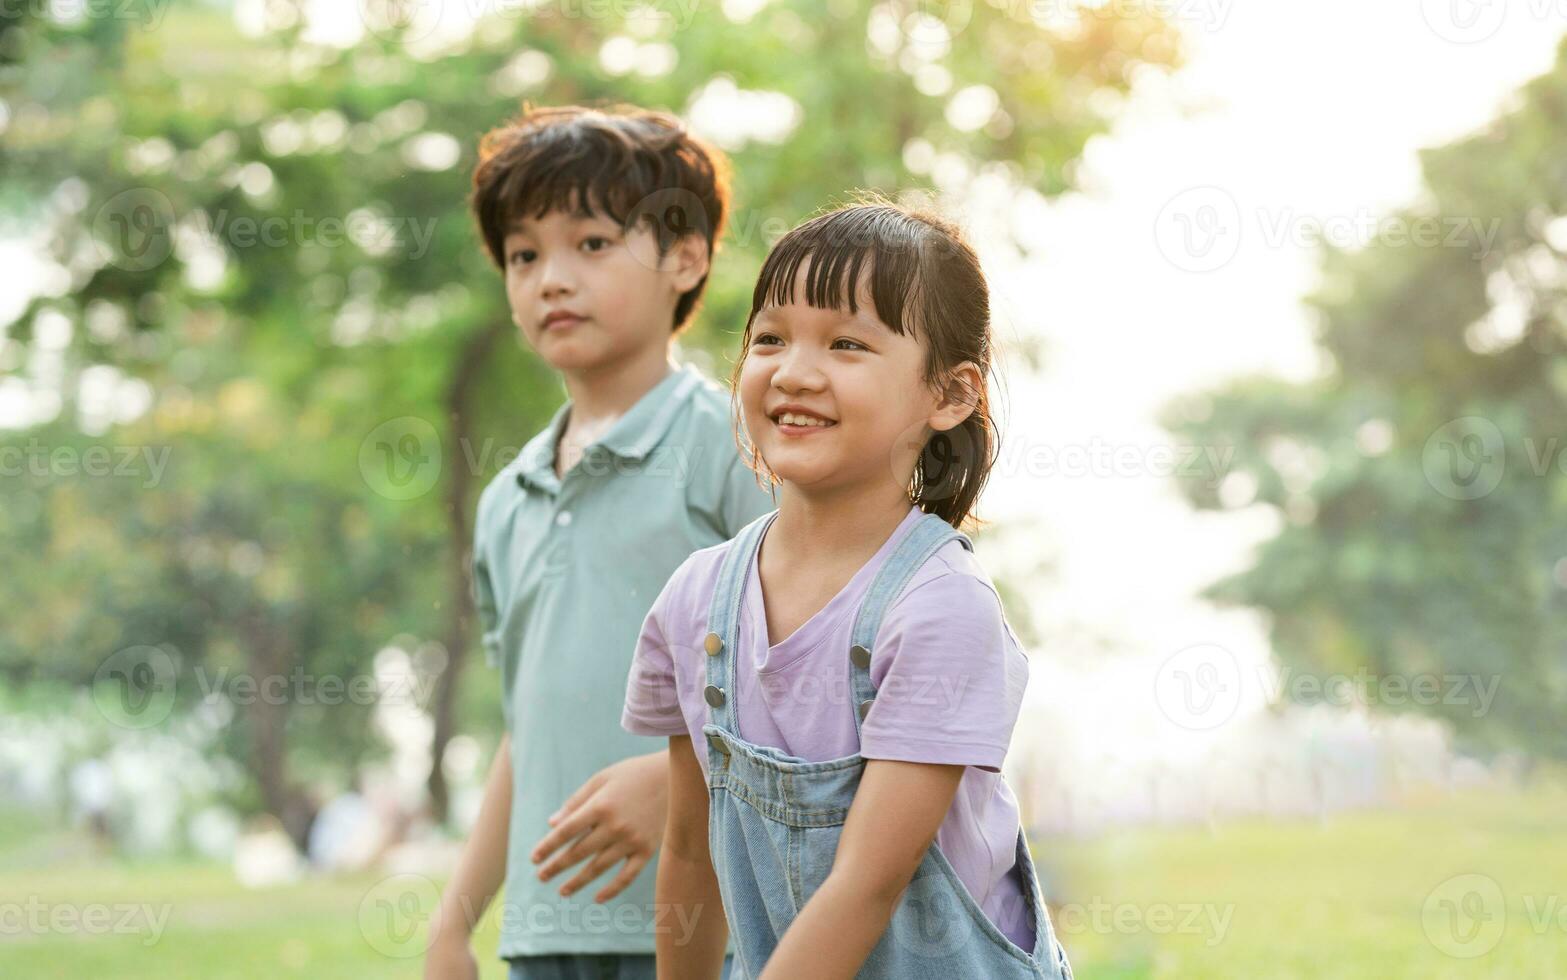 group image of cute asian children playing in the park photo